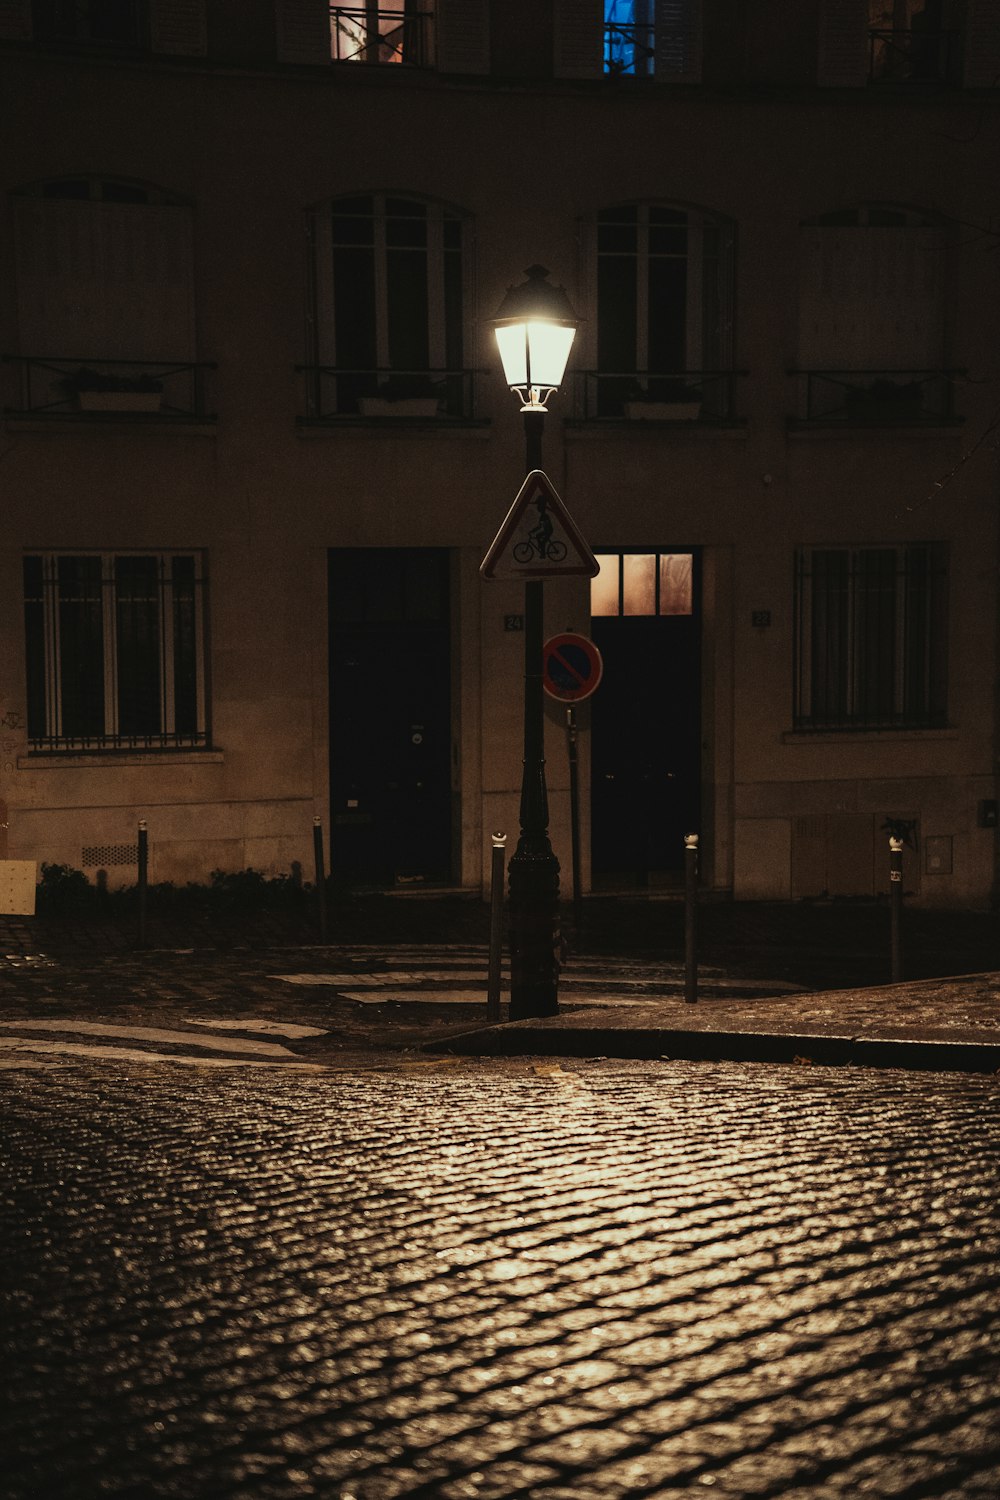 a street sign on a cobblestone street at night